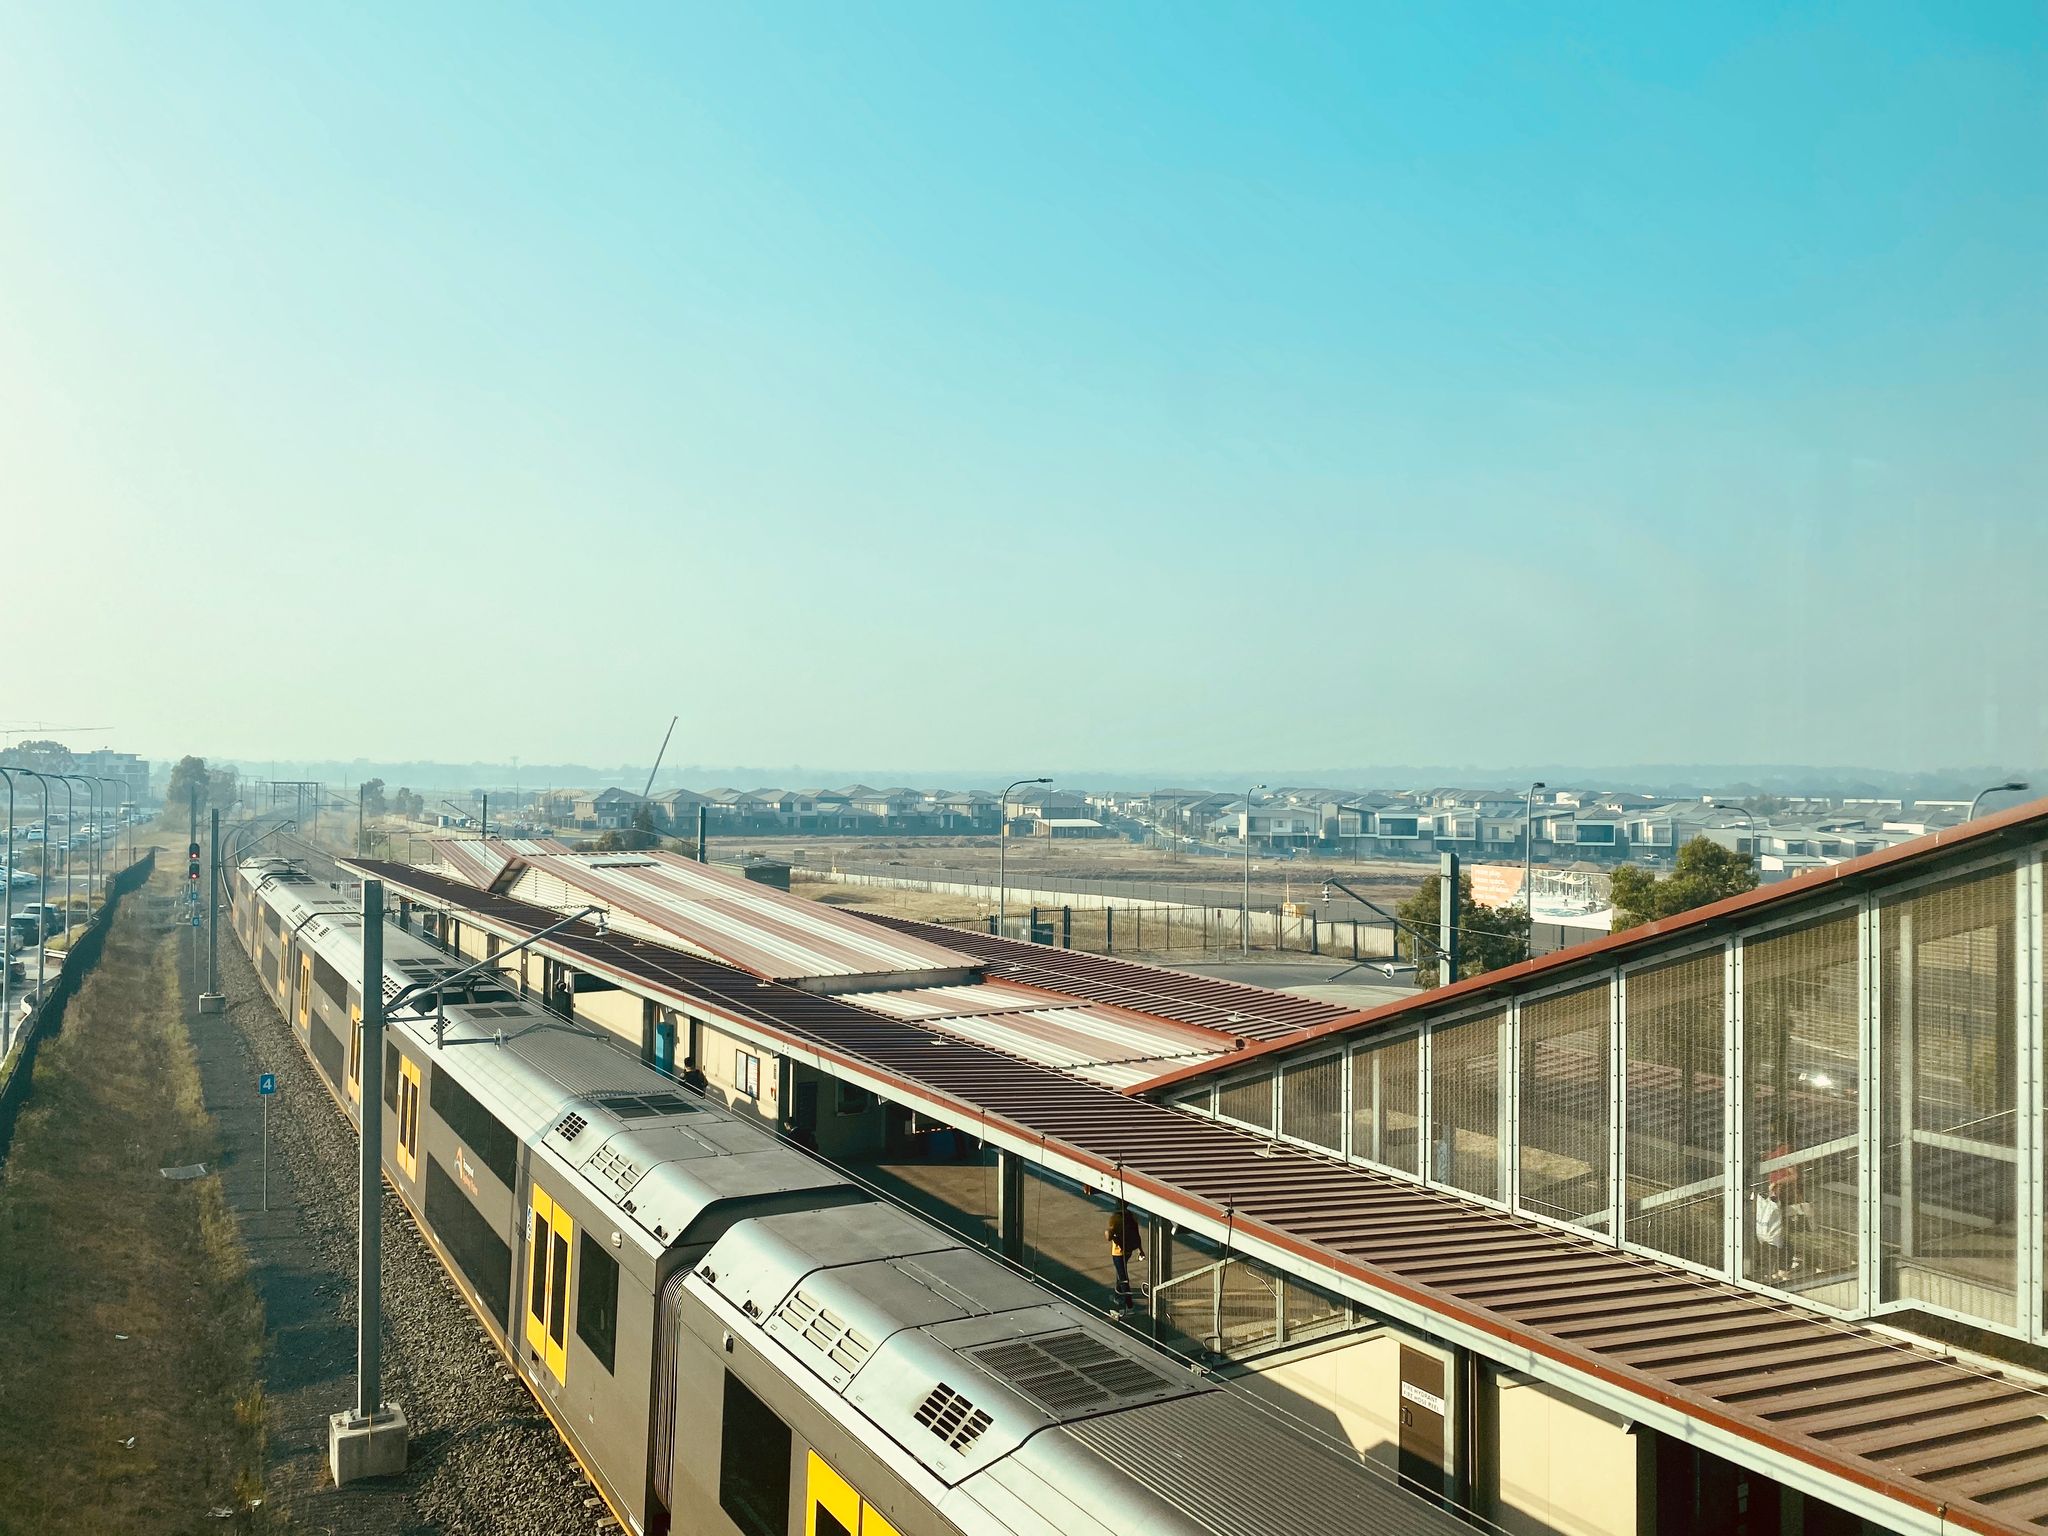 A photo taken from a train station, where the pedestrian bridge crosses above the tracks. A train is waiting at the platform below and left of frame, in the distance are houses, and the whole distance is totally hazy from bushfire smoke.